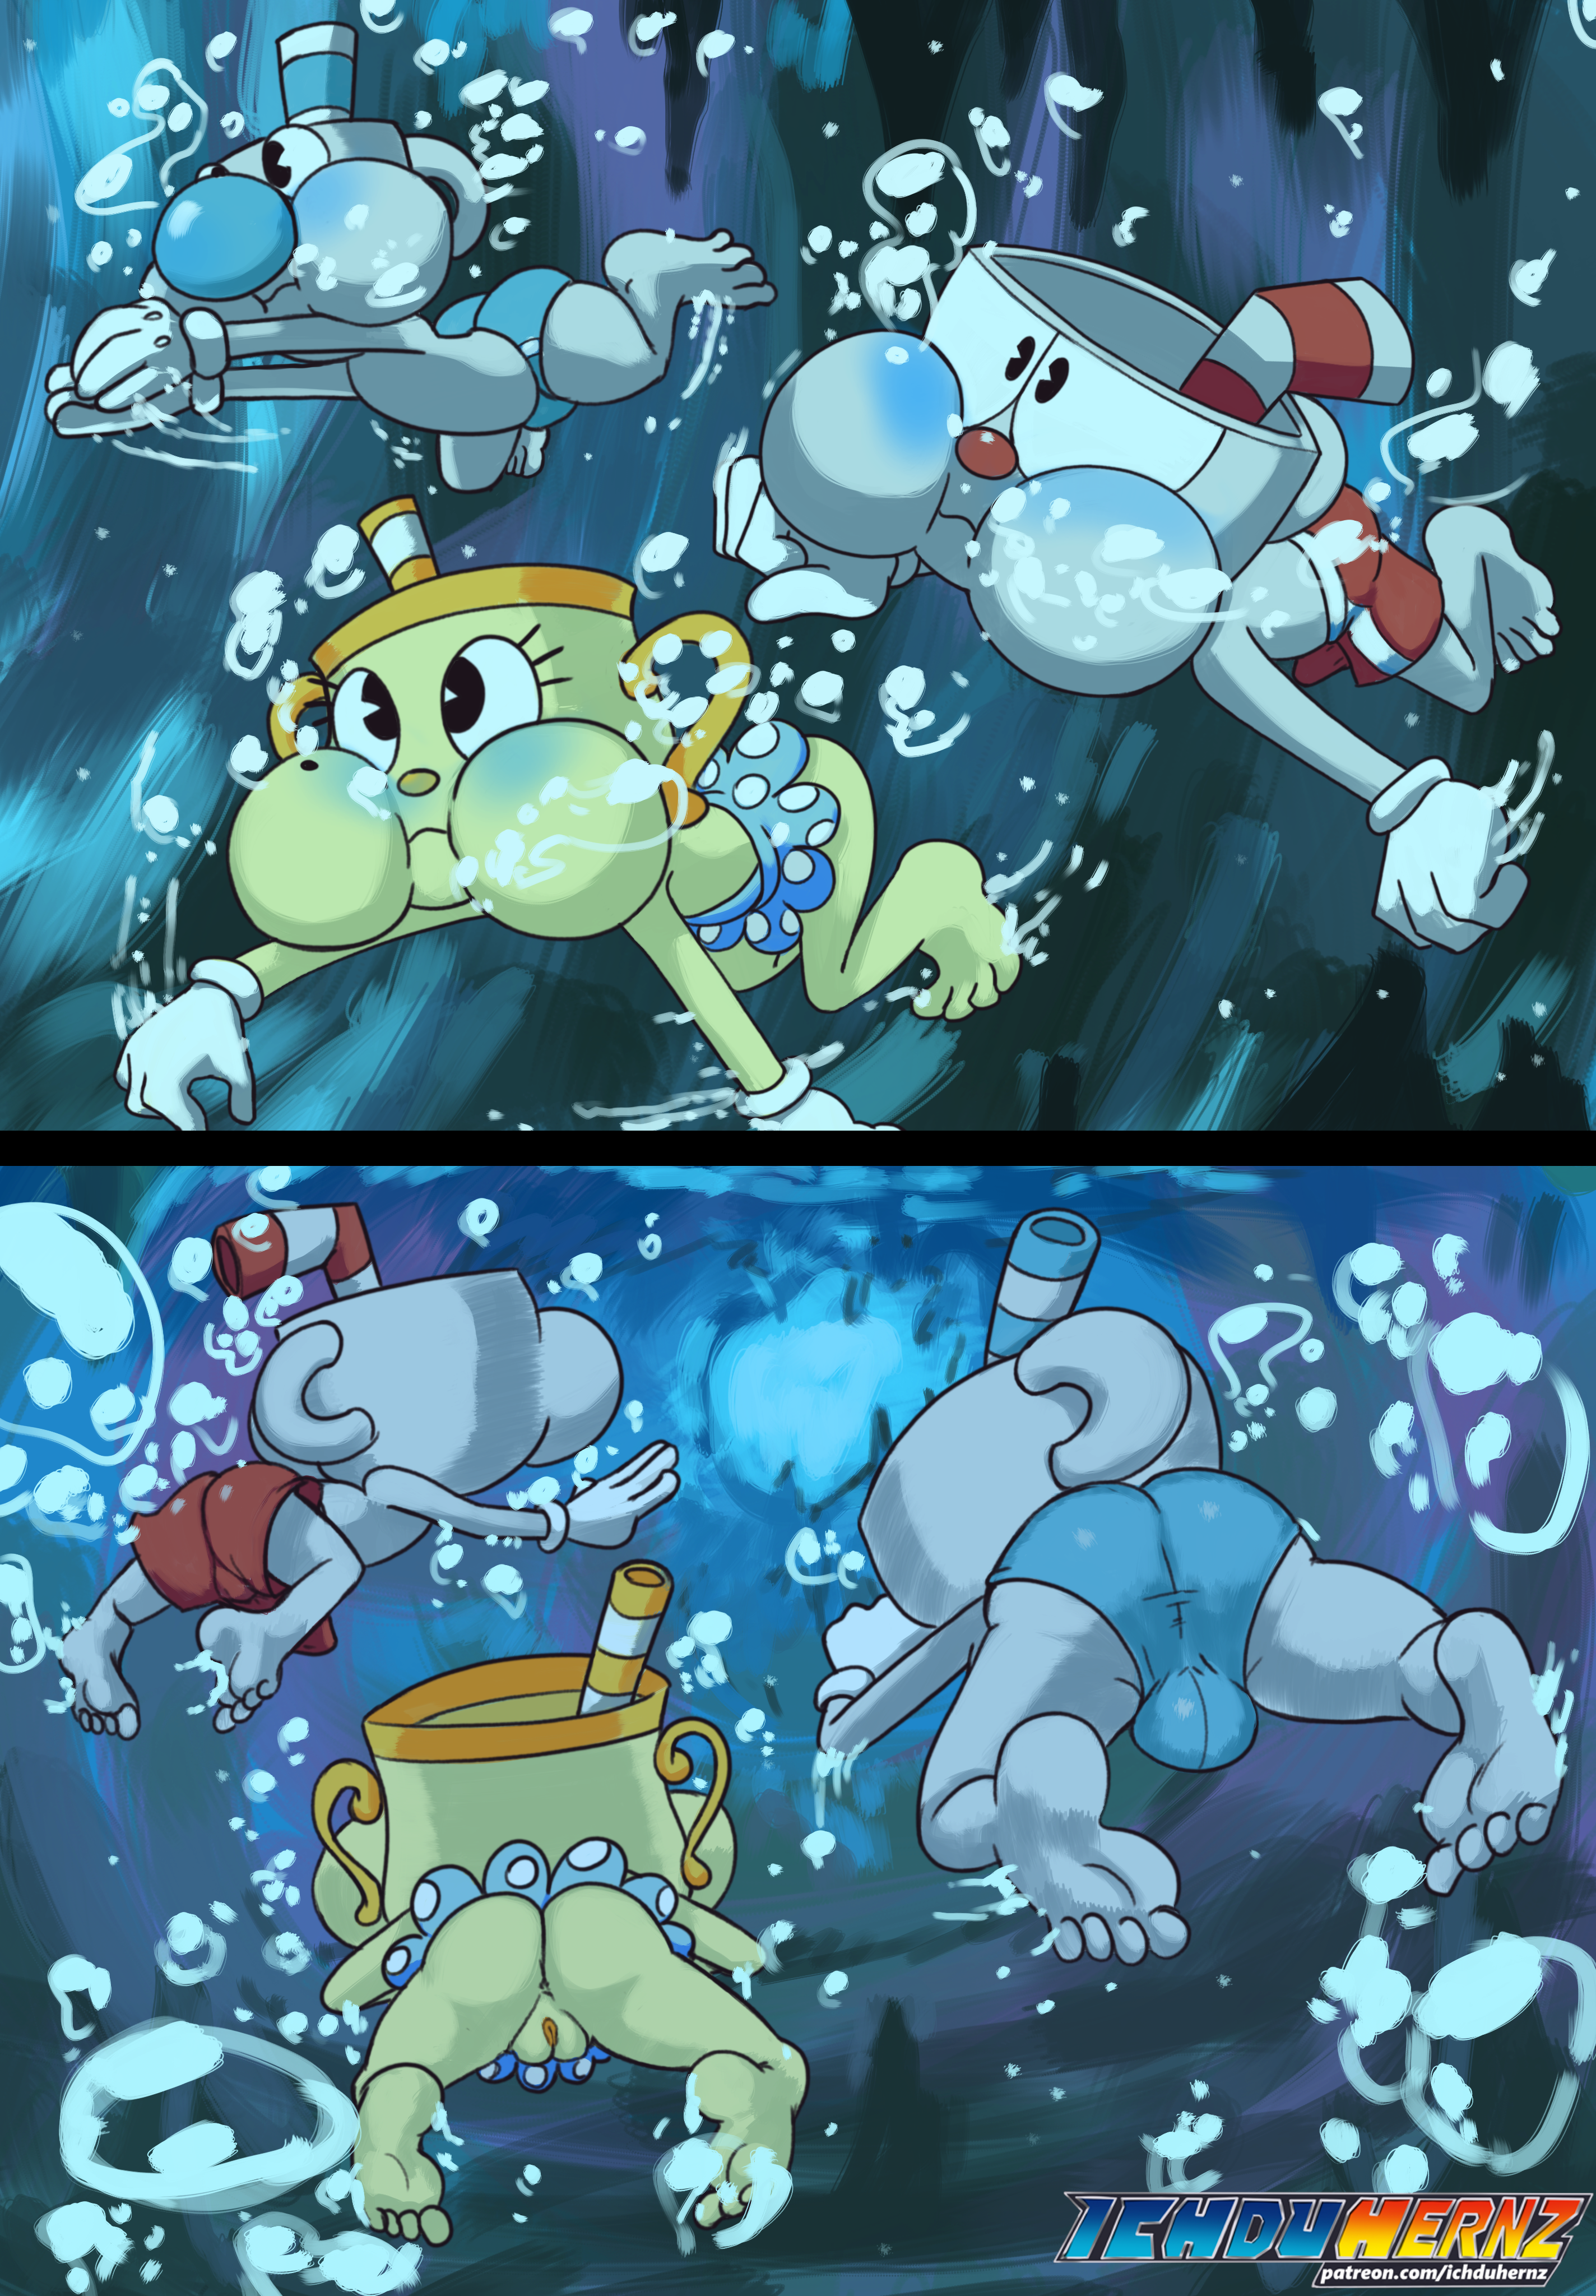 ichduhernz, cuphead (character), ms. chalice, mugman, cuphead (game), absur...